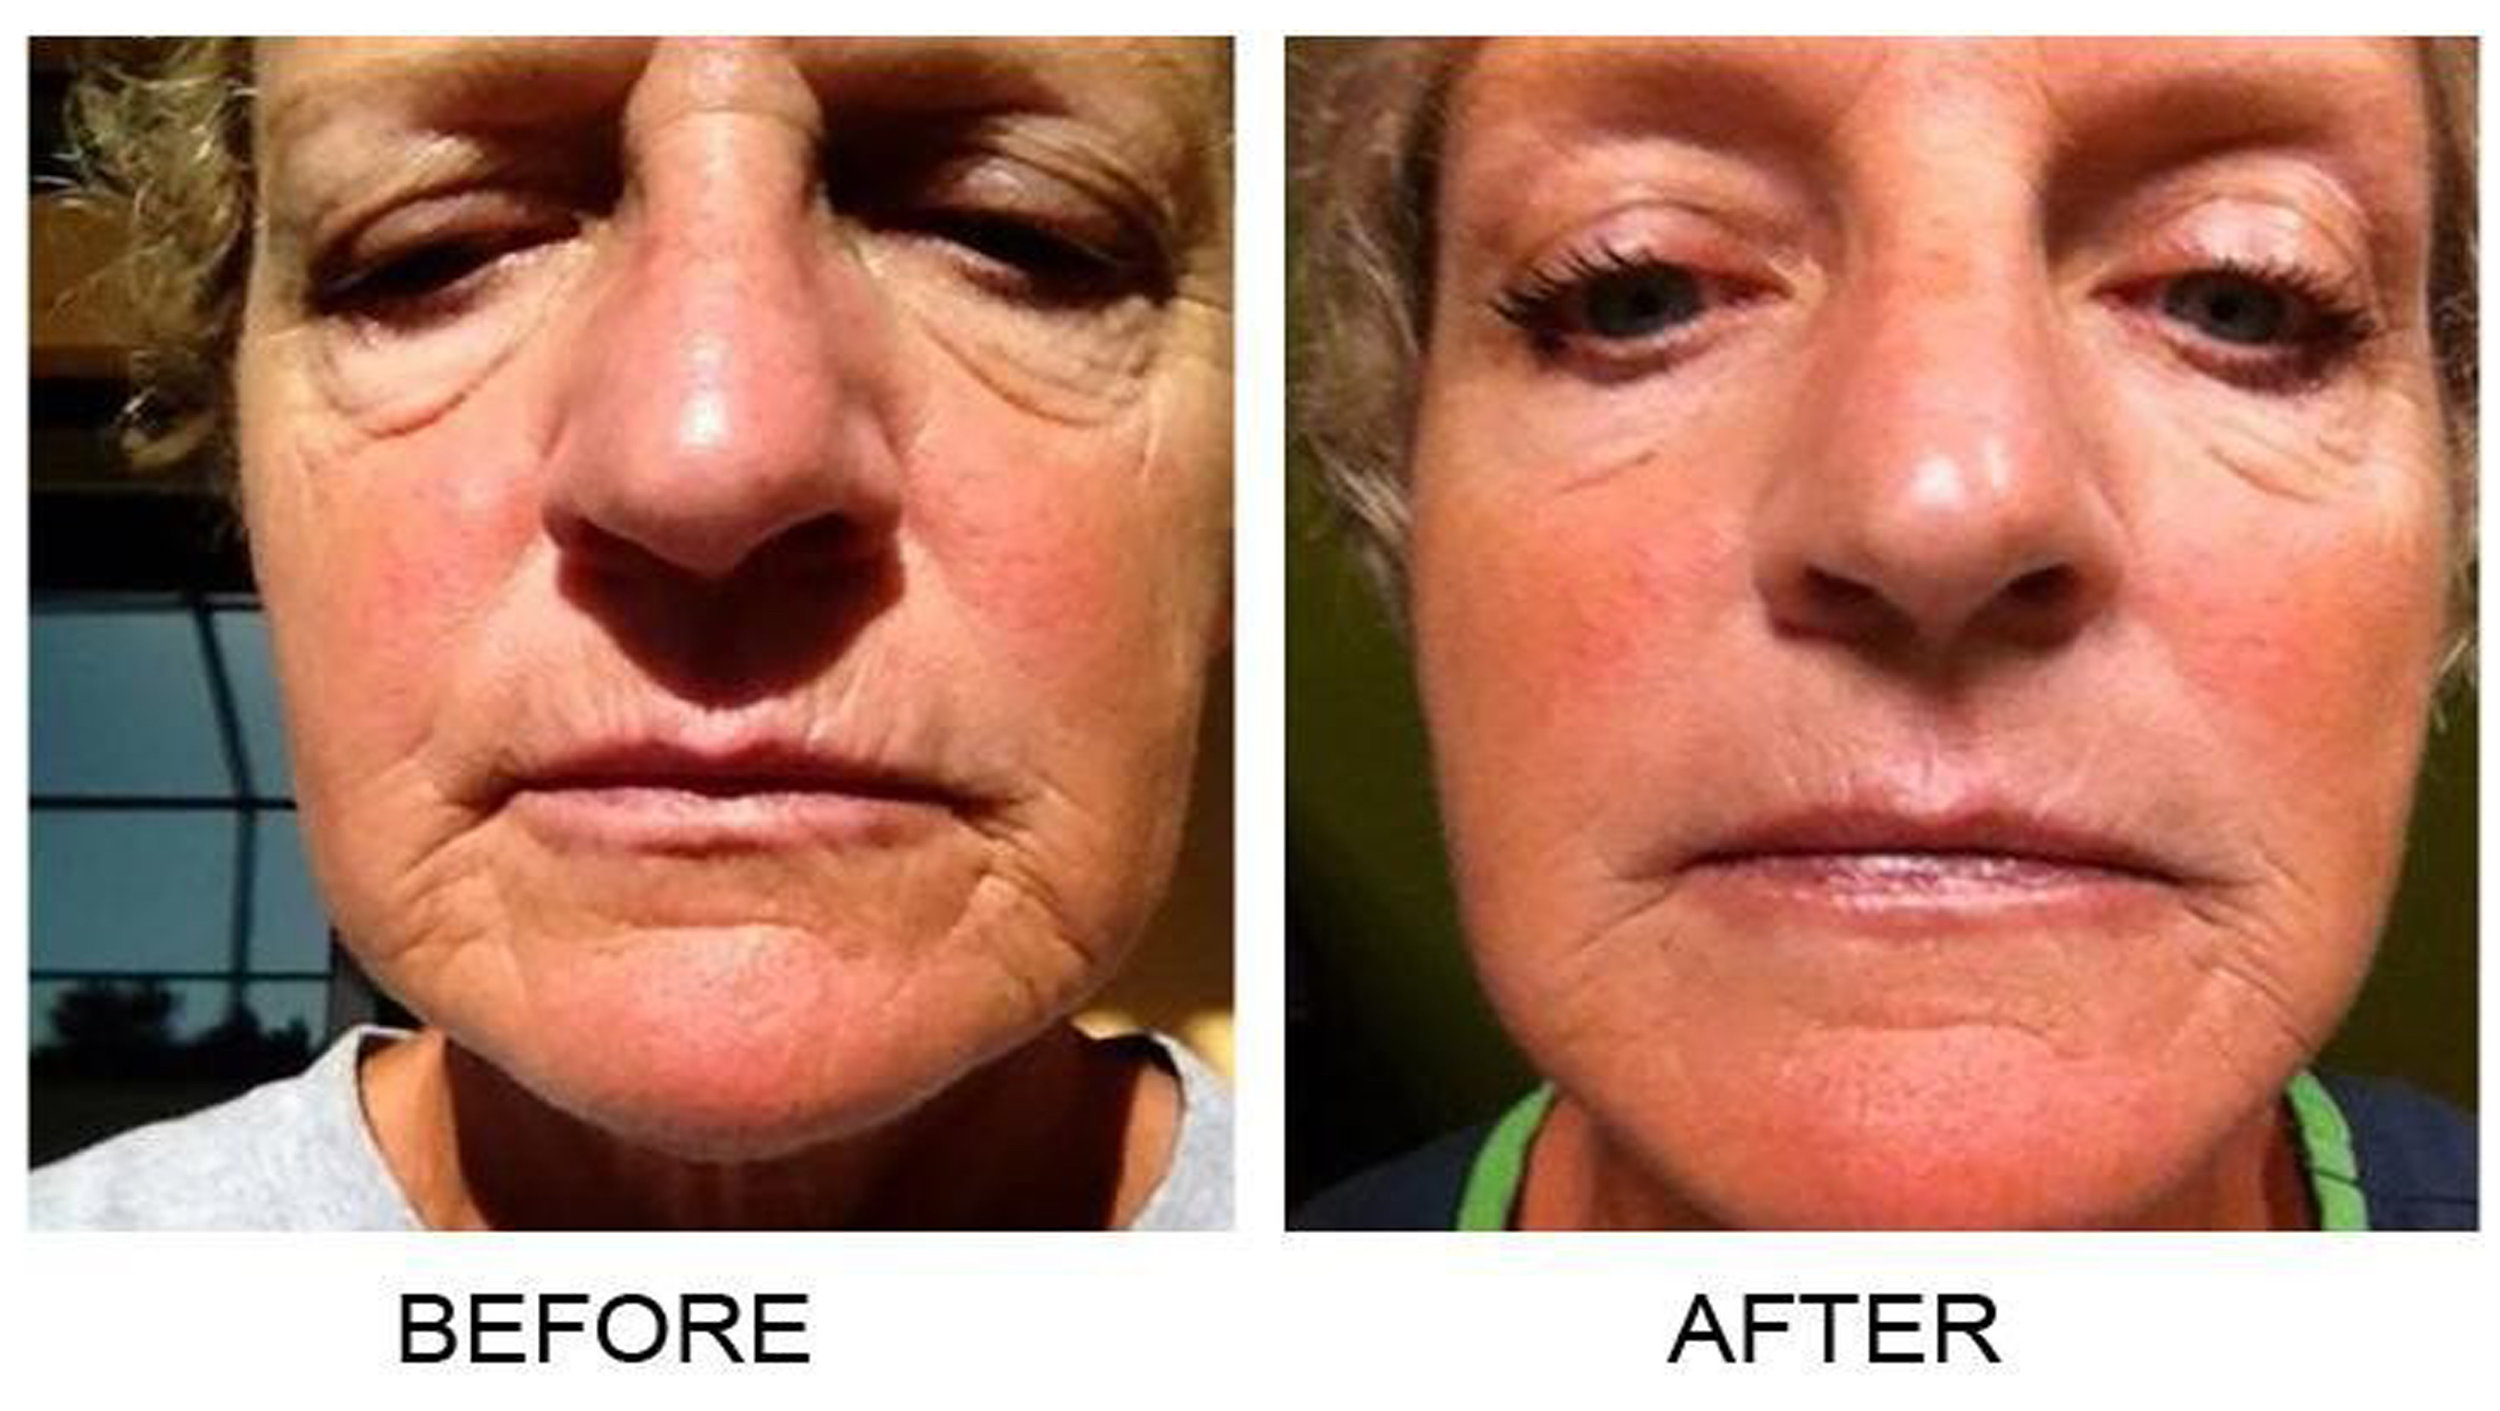  Betty Joe's results after 12 sessions of microcurrent. 